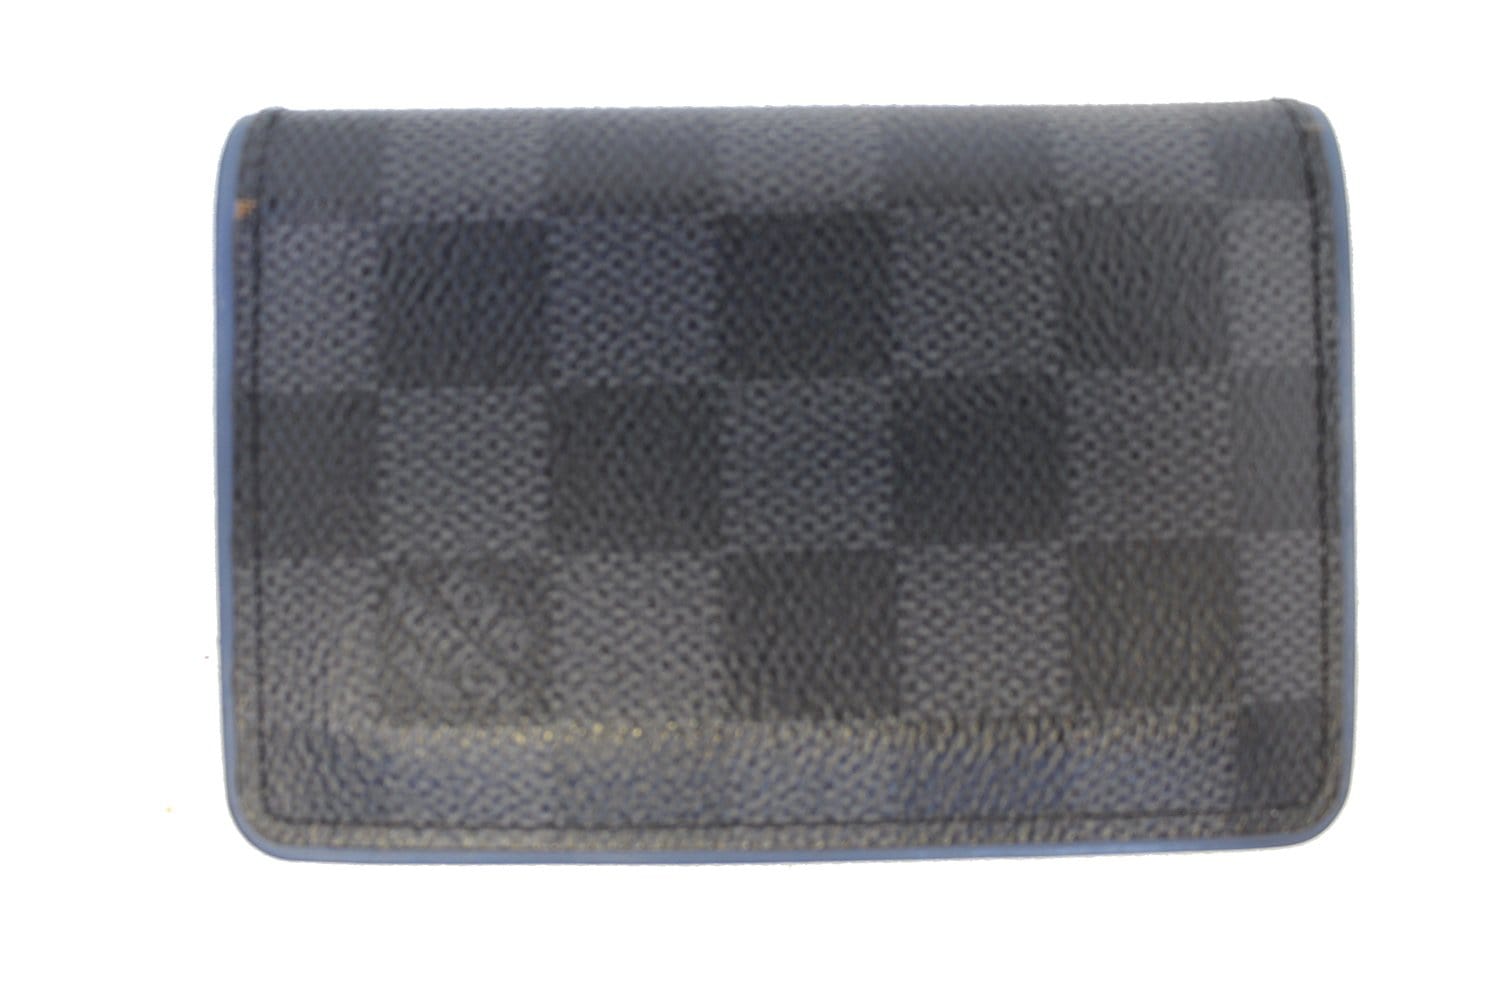 Pocket Organiser Damier Graphite Canvas - Wallets and Small Leather Goods